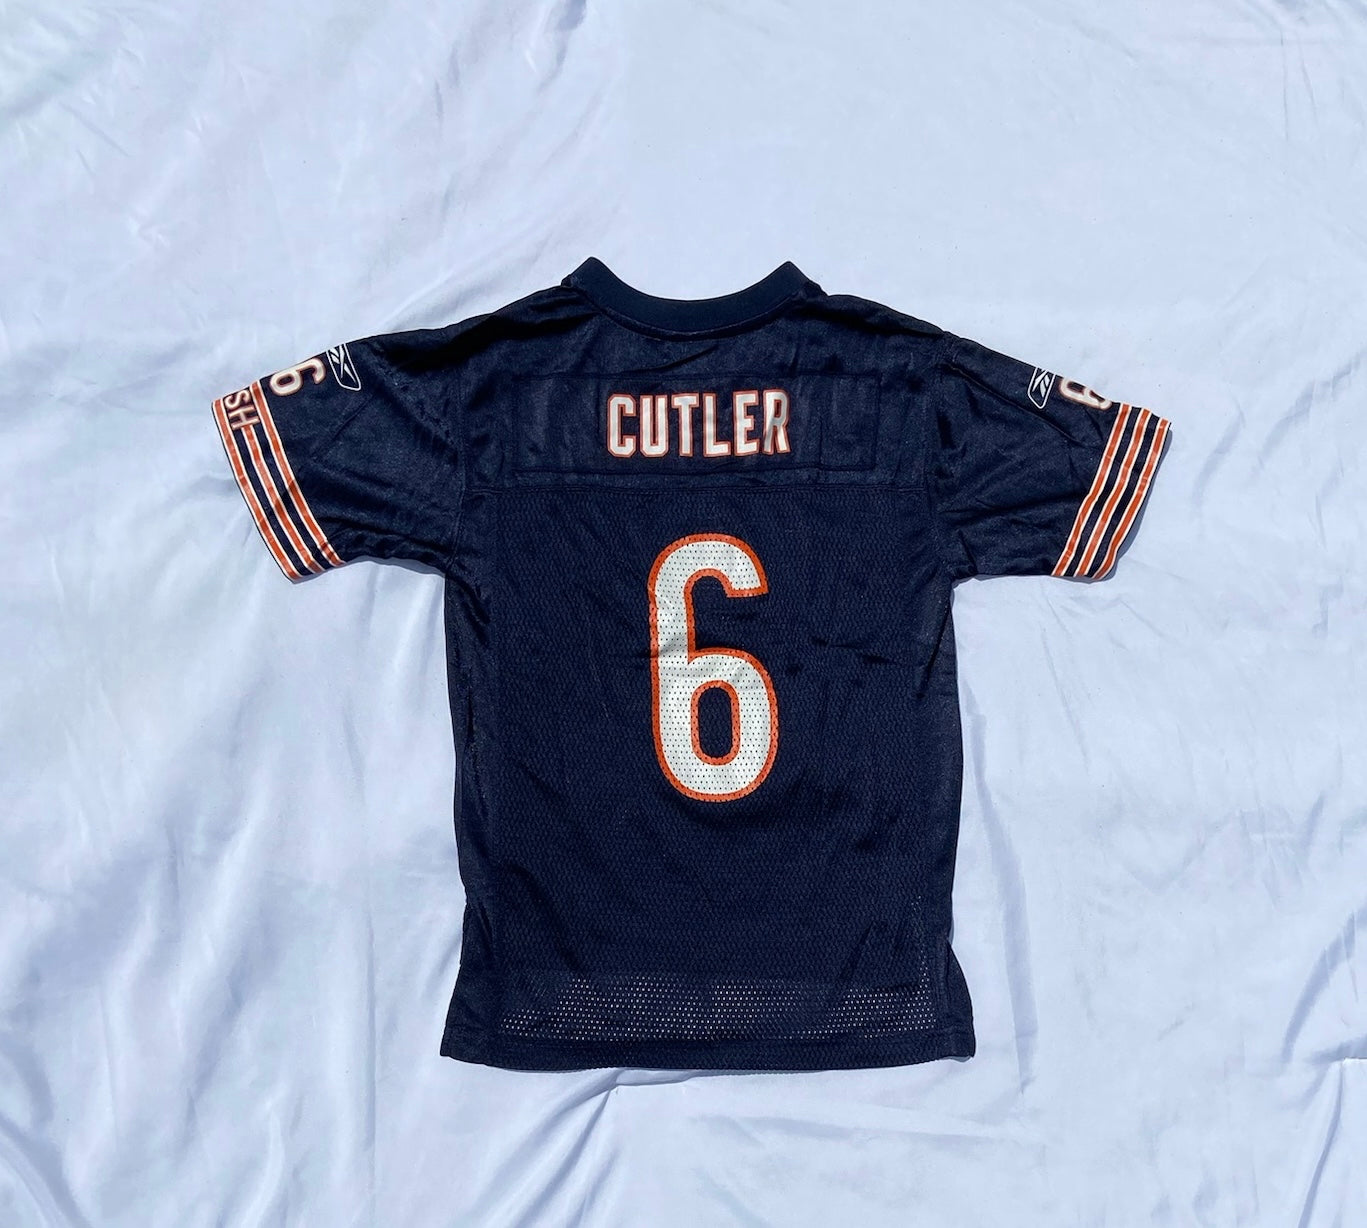 Bears Cutler Jersey- WILL BE CROPPED